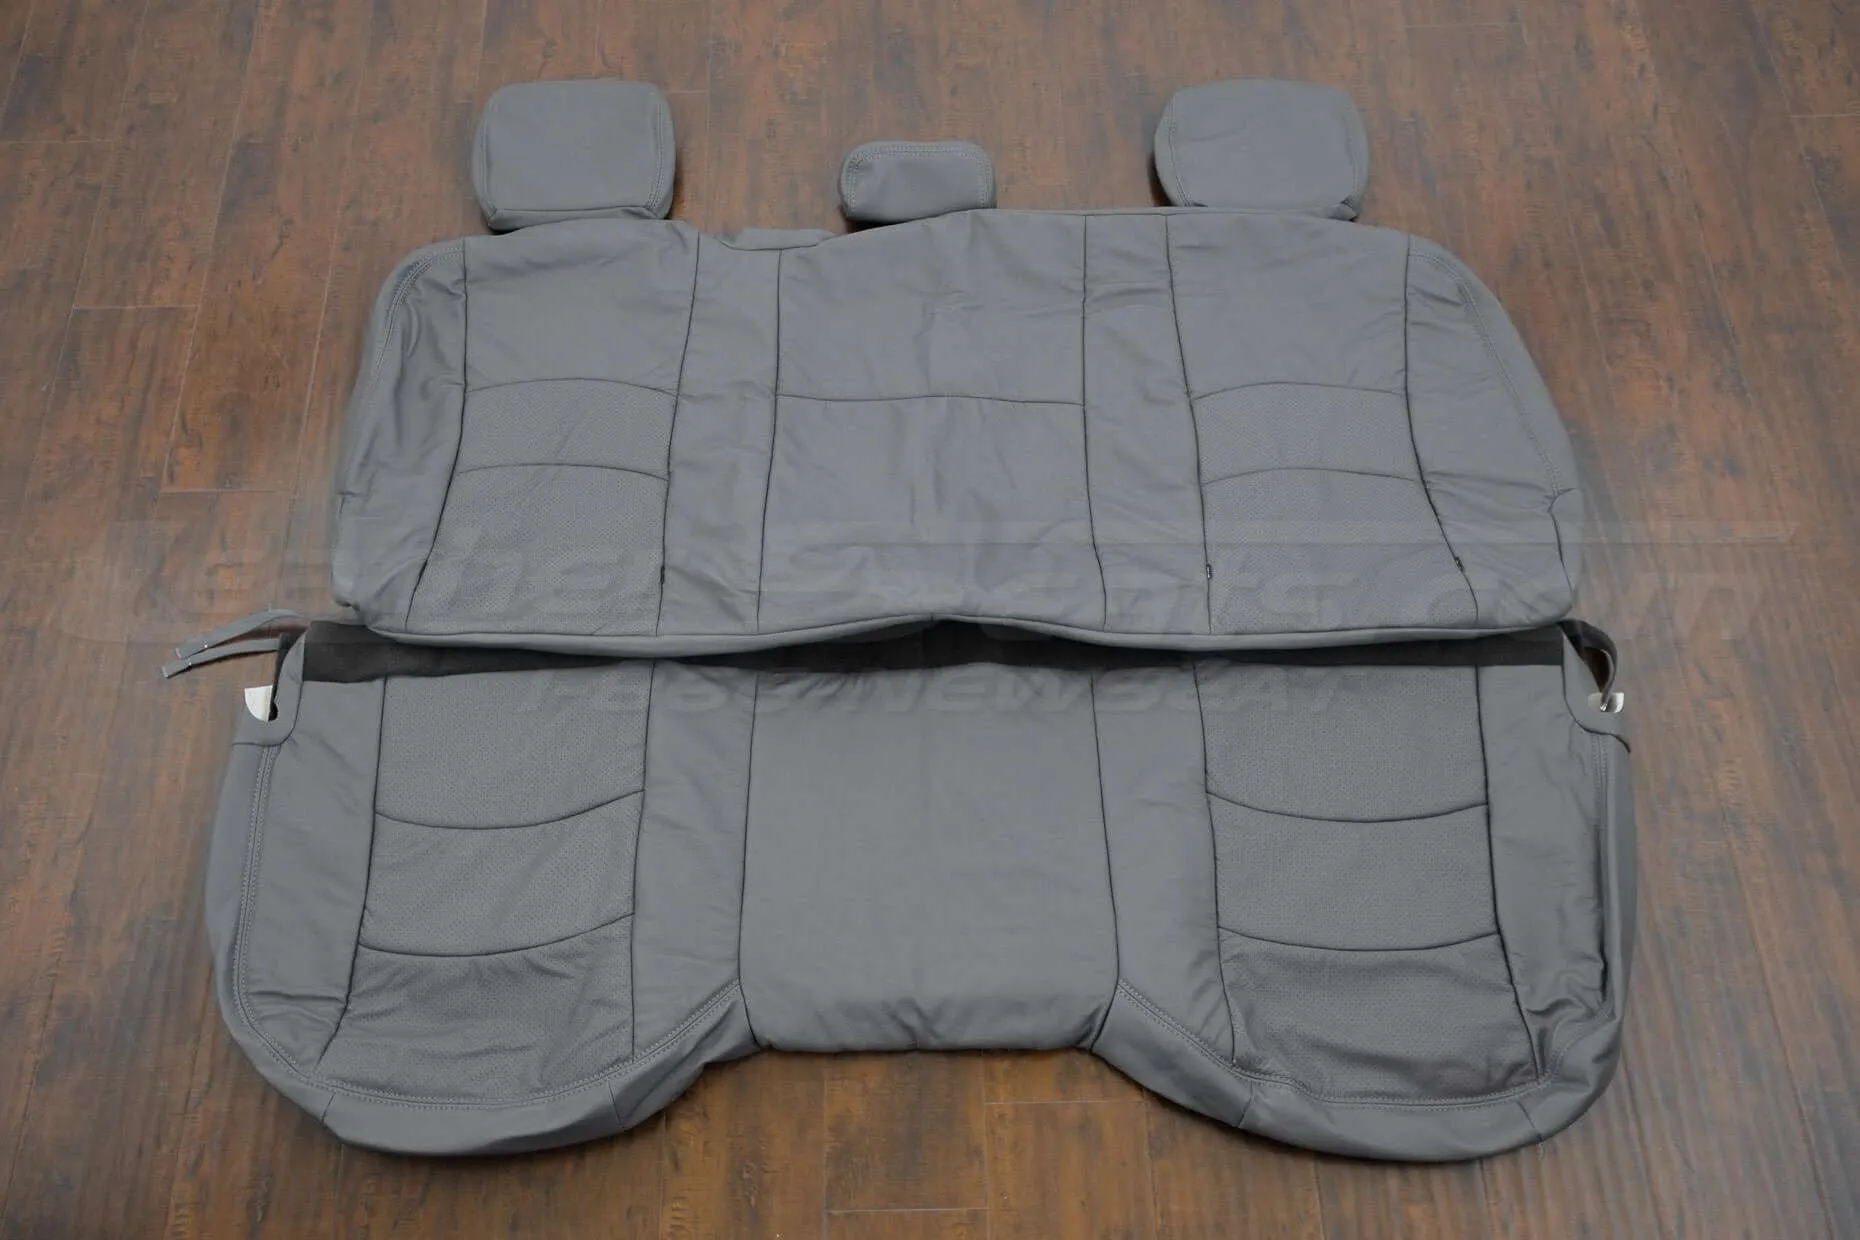 Rear seat upholstery for dodge ram